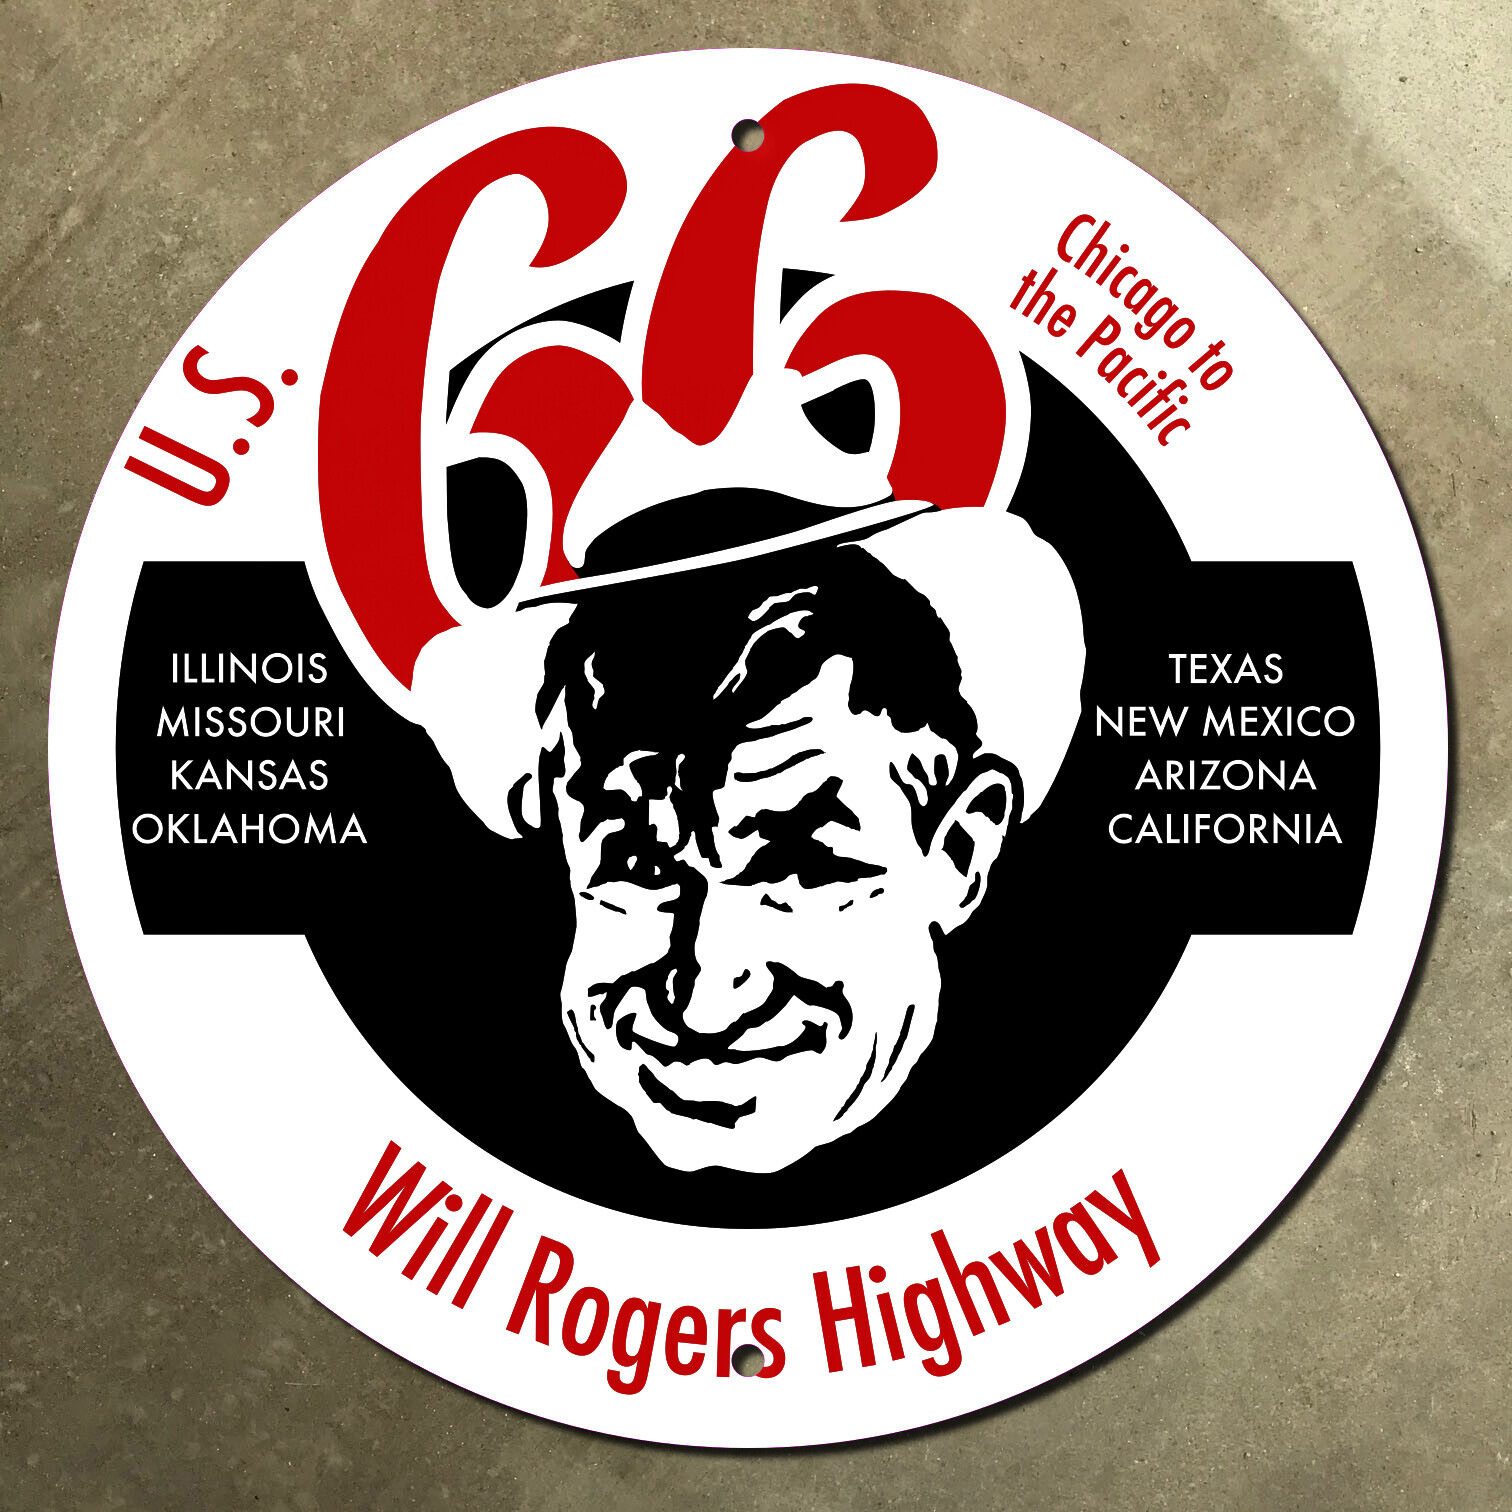 Will Rogers Highway US 66 mother road marker road sign shield 1952 16x16